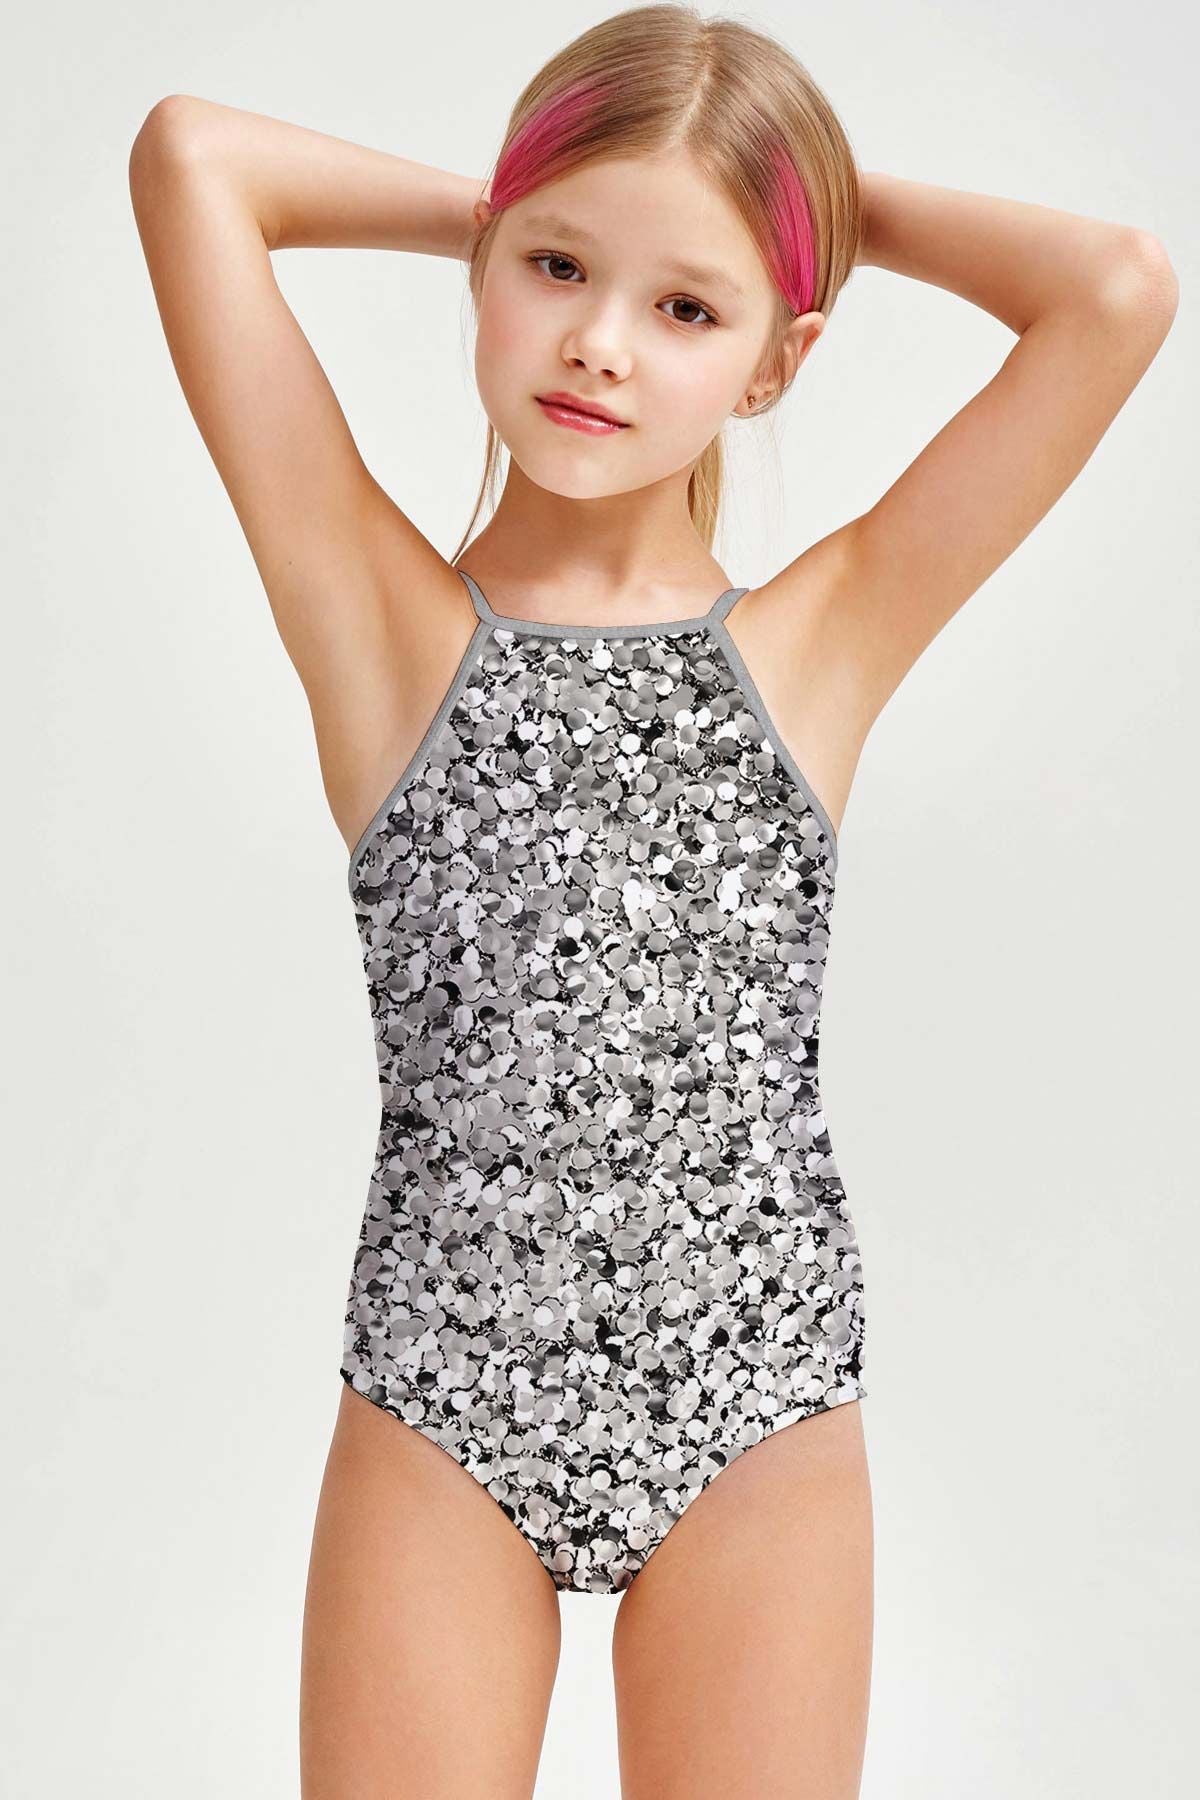 Let It Glow Becky Glitter Full Coverage One-Piece Swimsuit - Girls - Pineapple Clothing